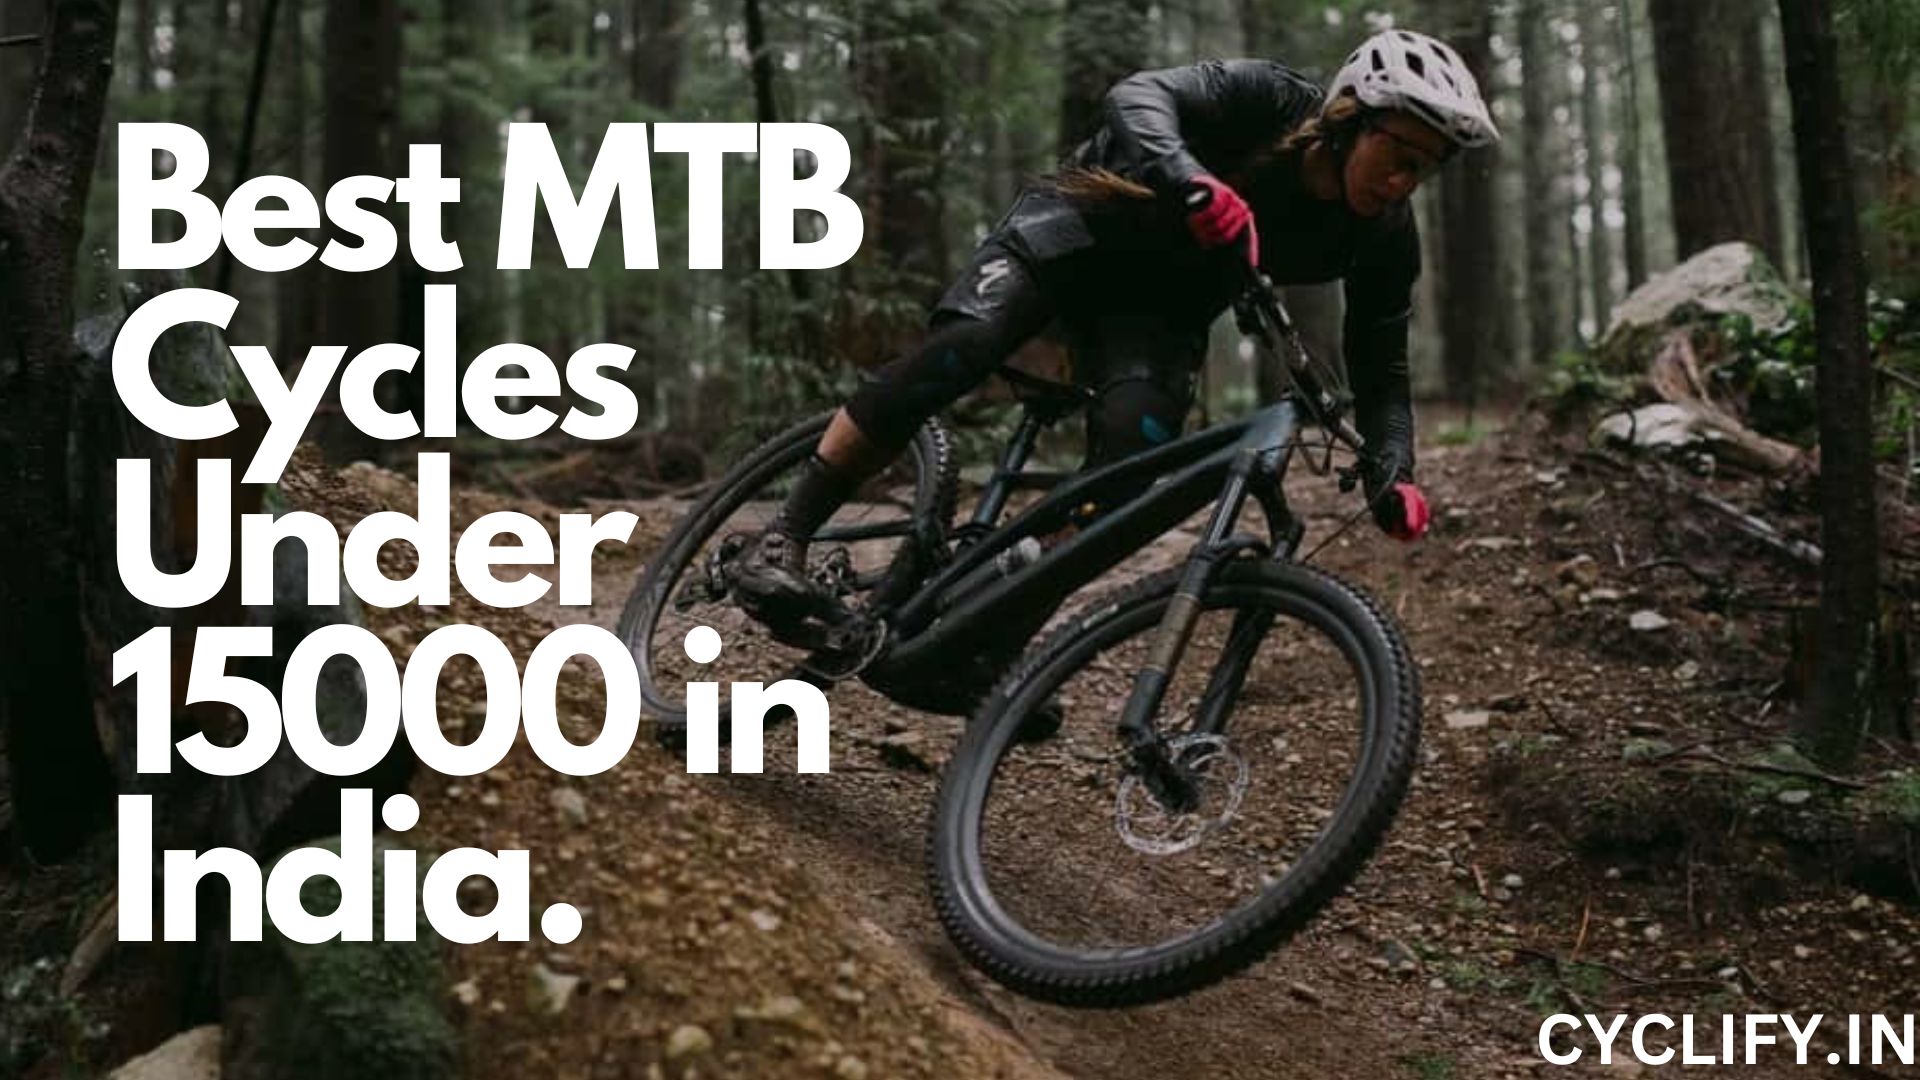 Best MTB Cycles Under 15000 in India.